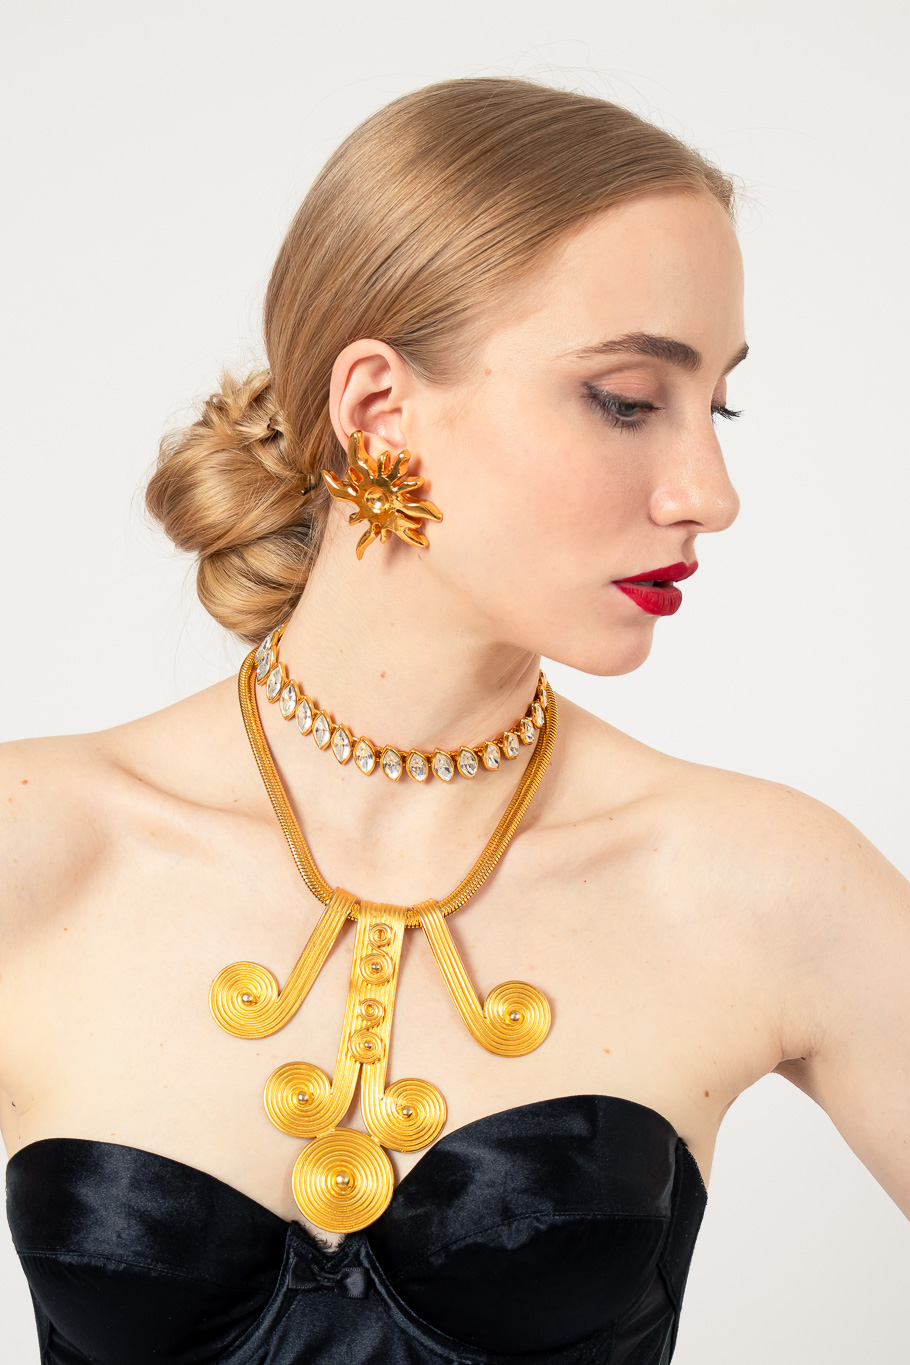 Sunburst earrings by Christian Lacroix on white background on model with necklaces @recessla